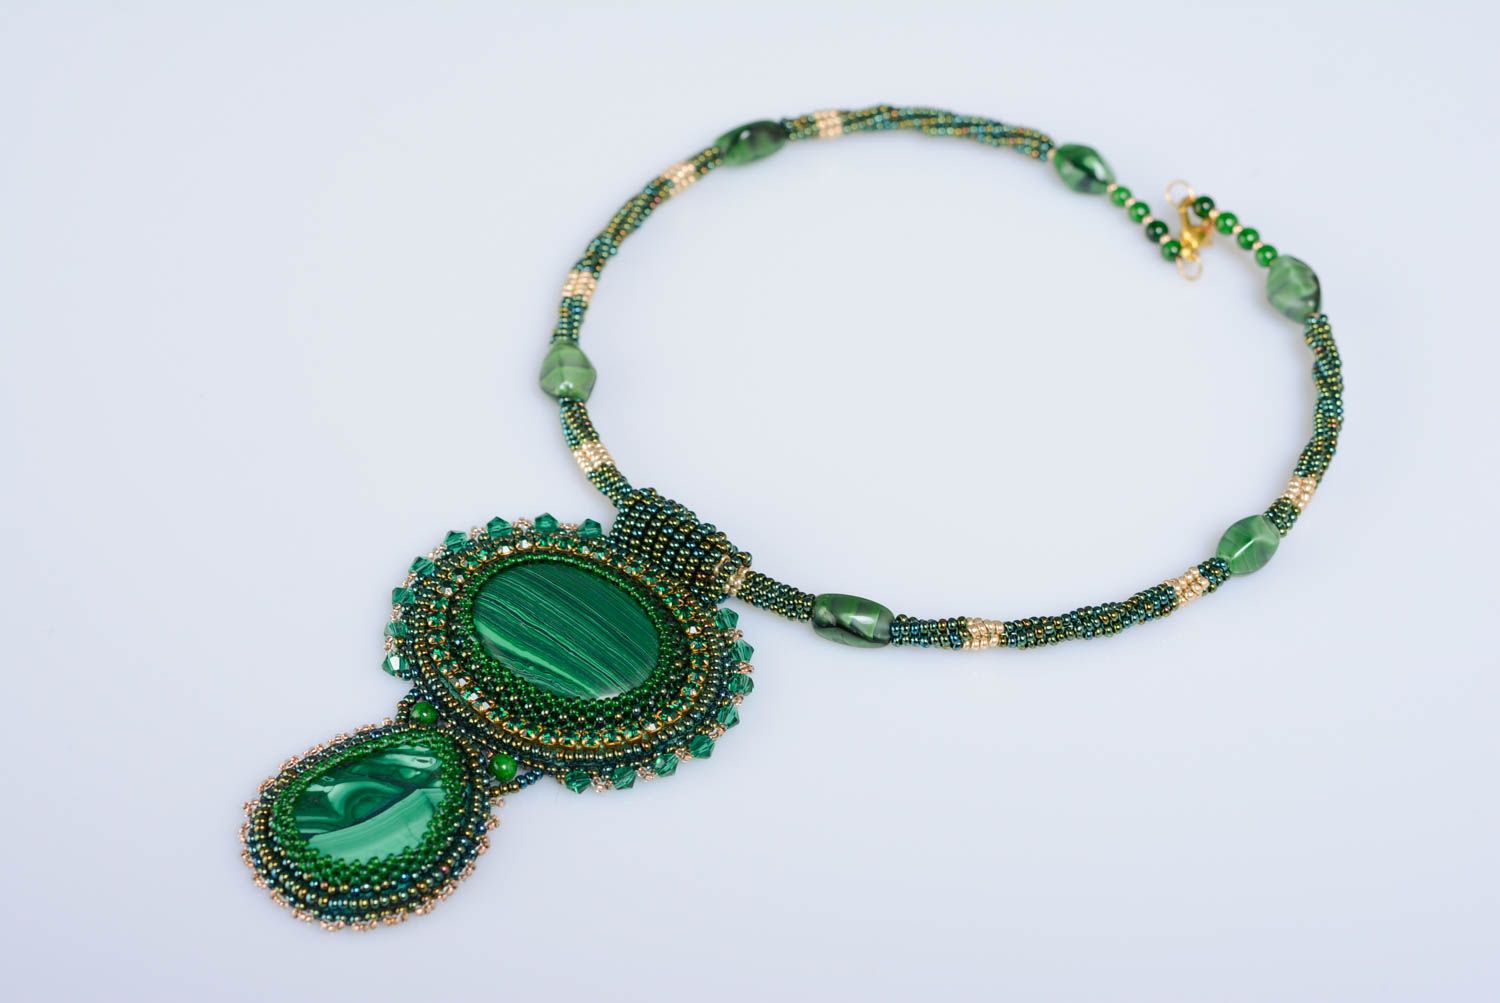 Handmade festive green bead embroidered pendant necklace with malachite stone photo 1